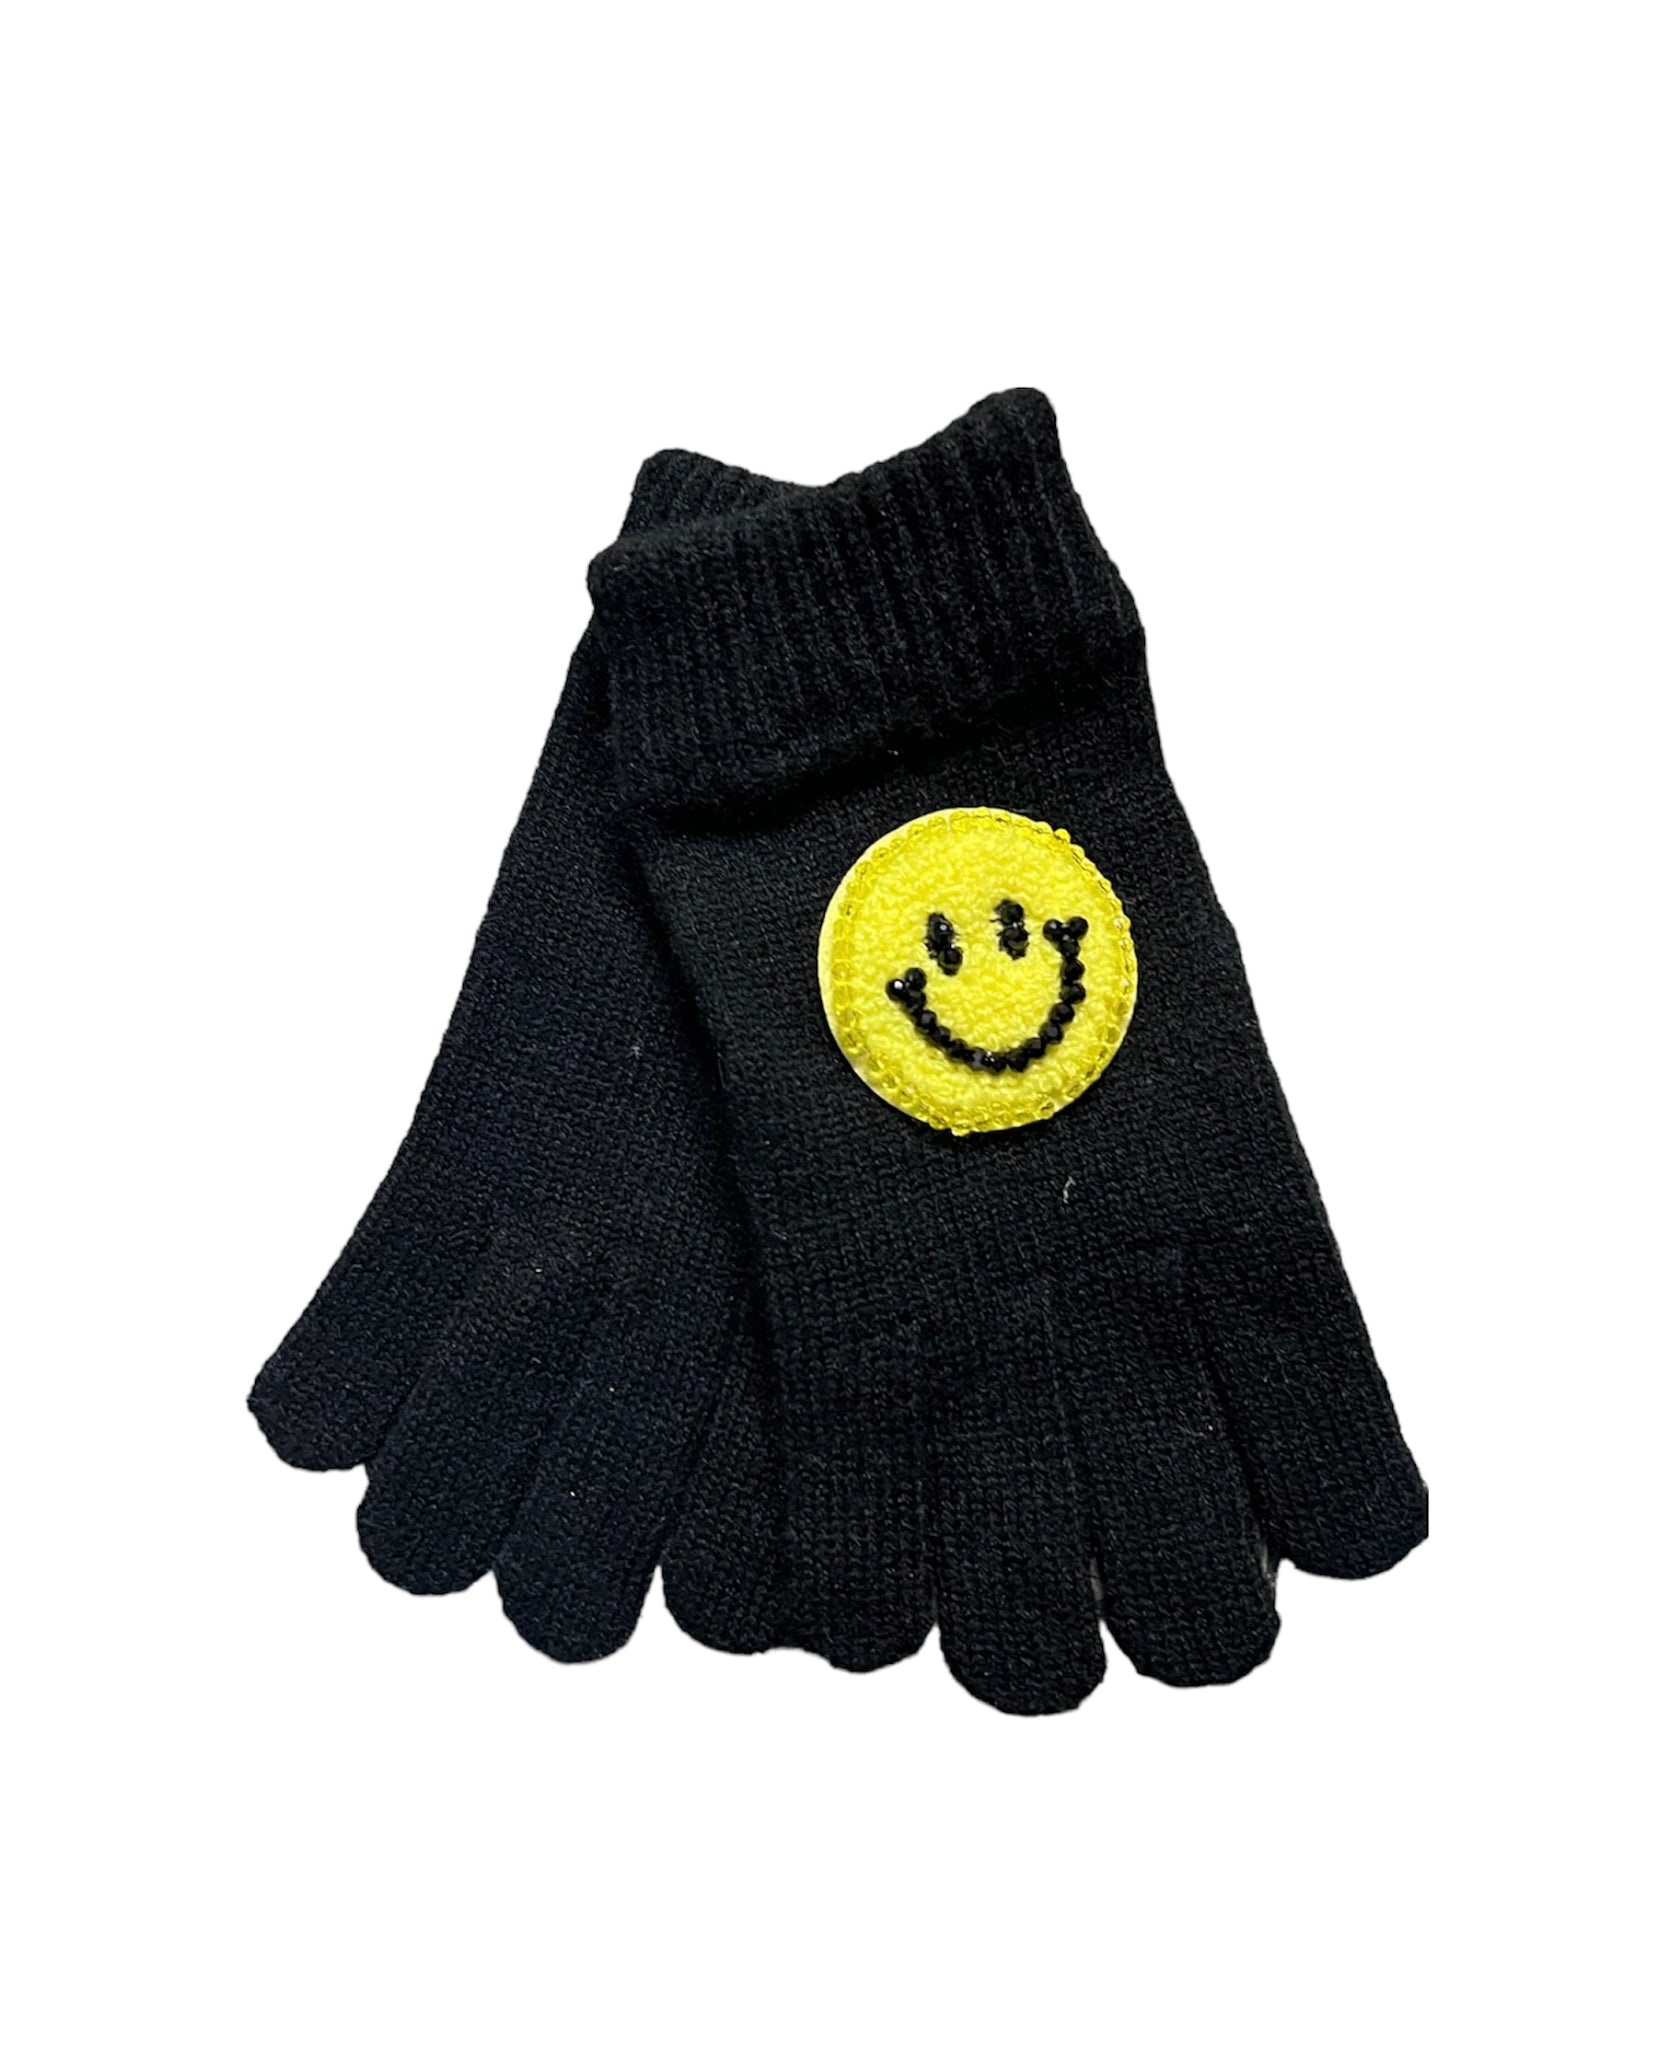 YELLOW HAPPY FACE PATCH BLACK GLOVES